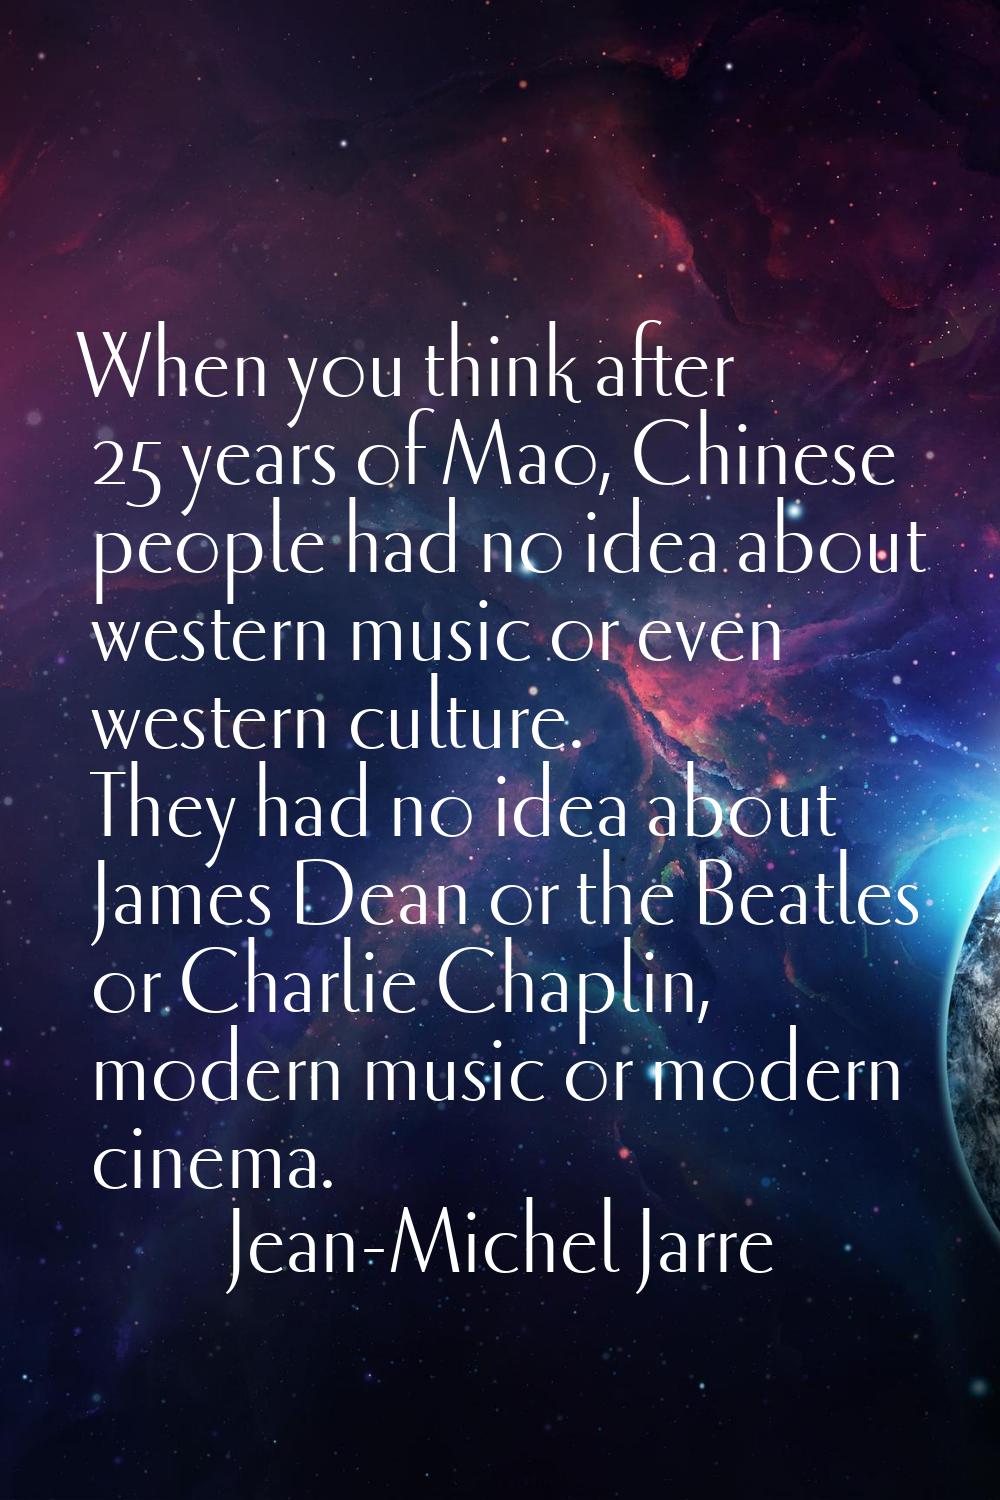 When you think after 25 years of Mao, Chinese people had no idea about western music or even wester